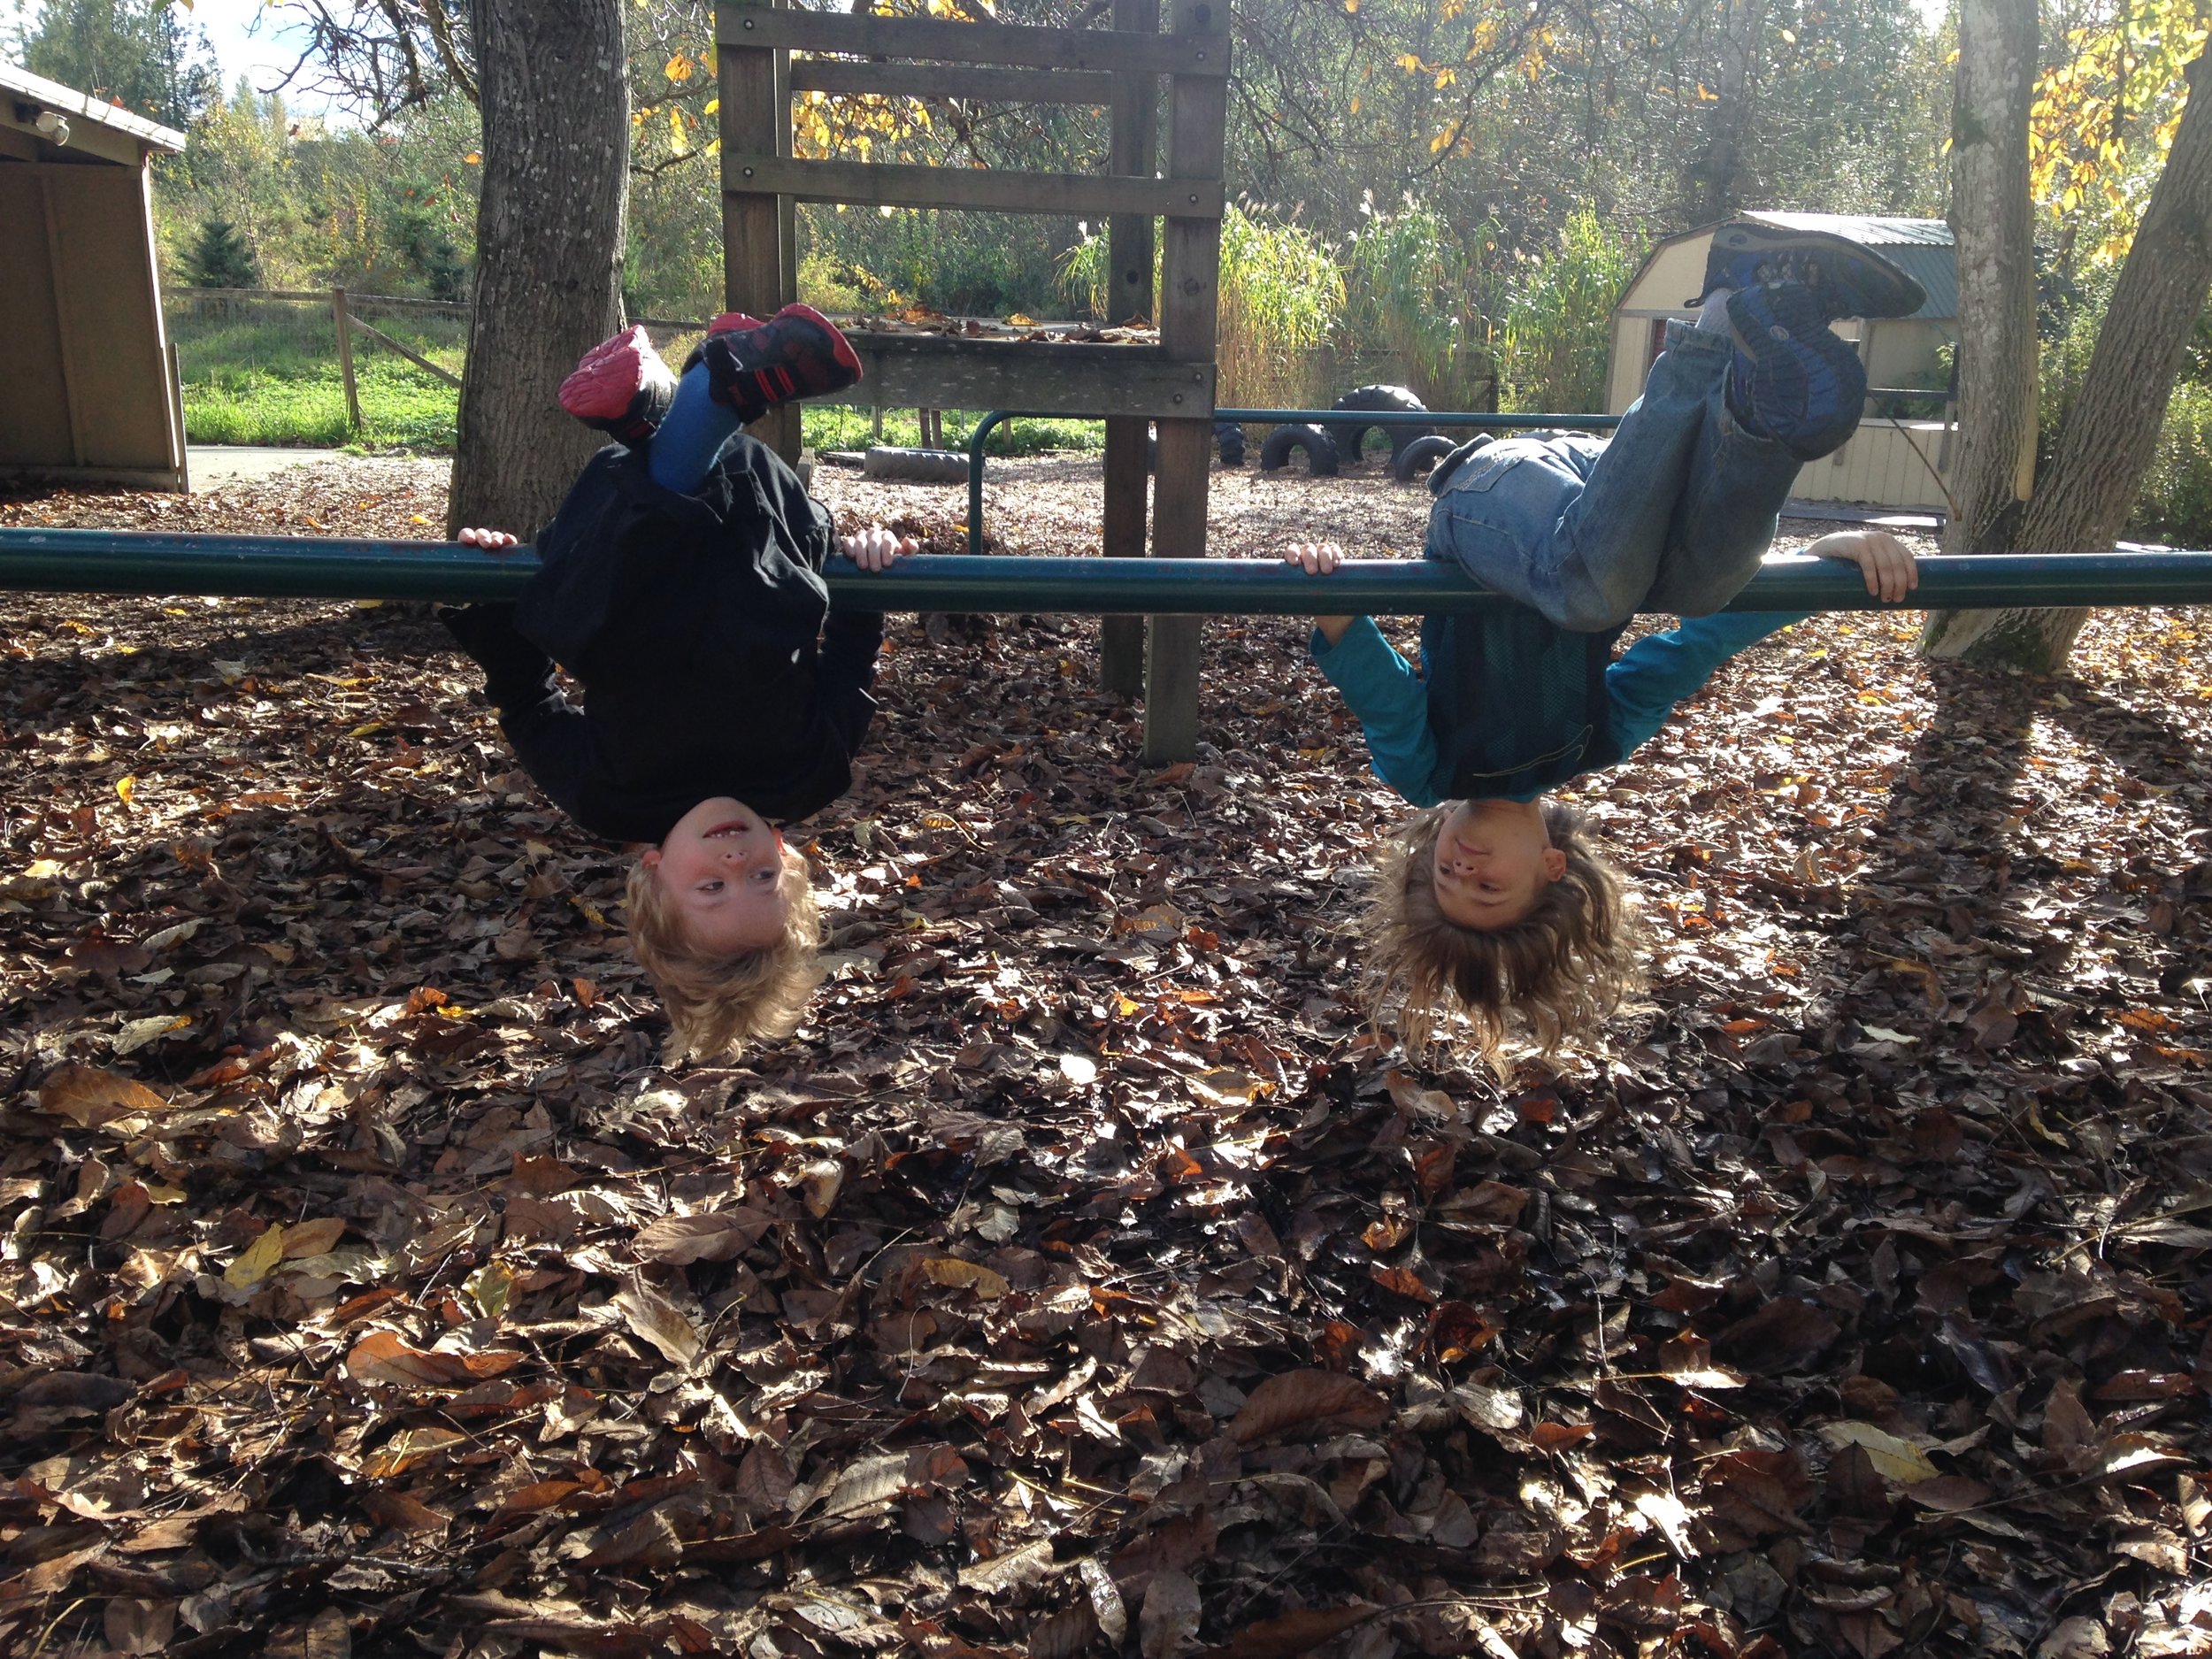 Two students hang upside down from a horizontal playground bar.